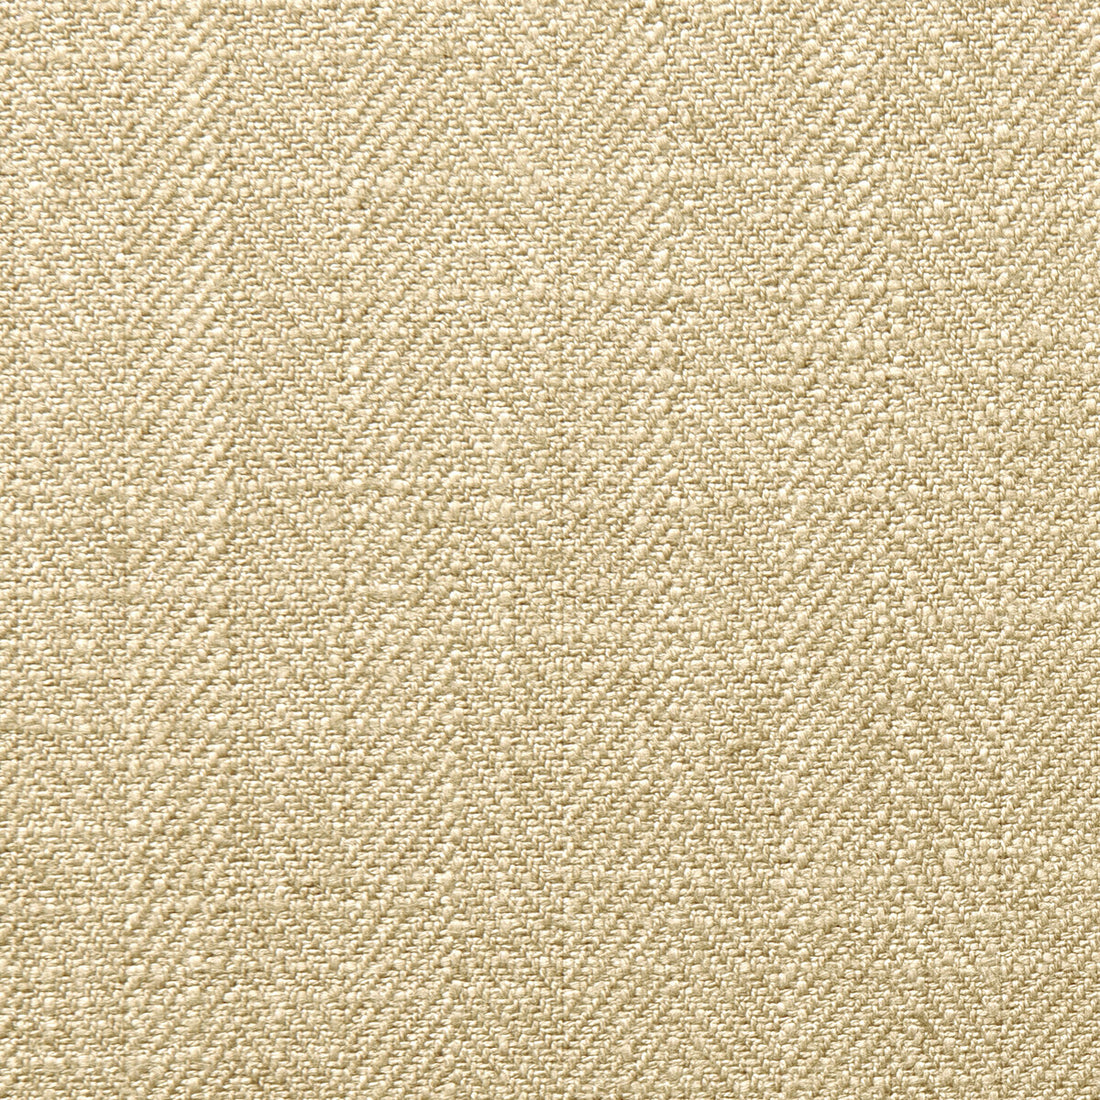 Henley fabric in sesame color - pattern F0648/31.CAC.0 - by Clarke And Clarke in the Clarke &amp; Clarke Henley collection